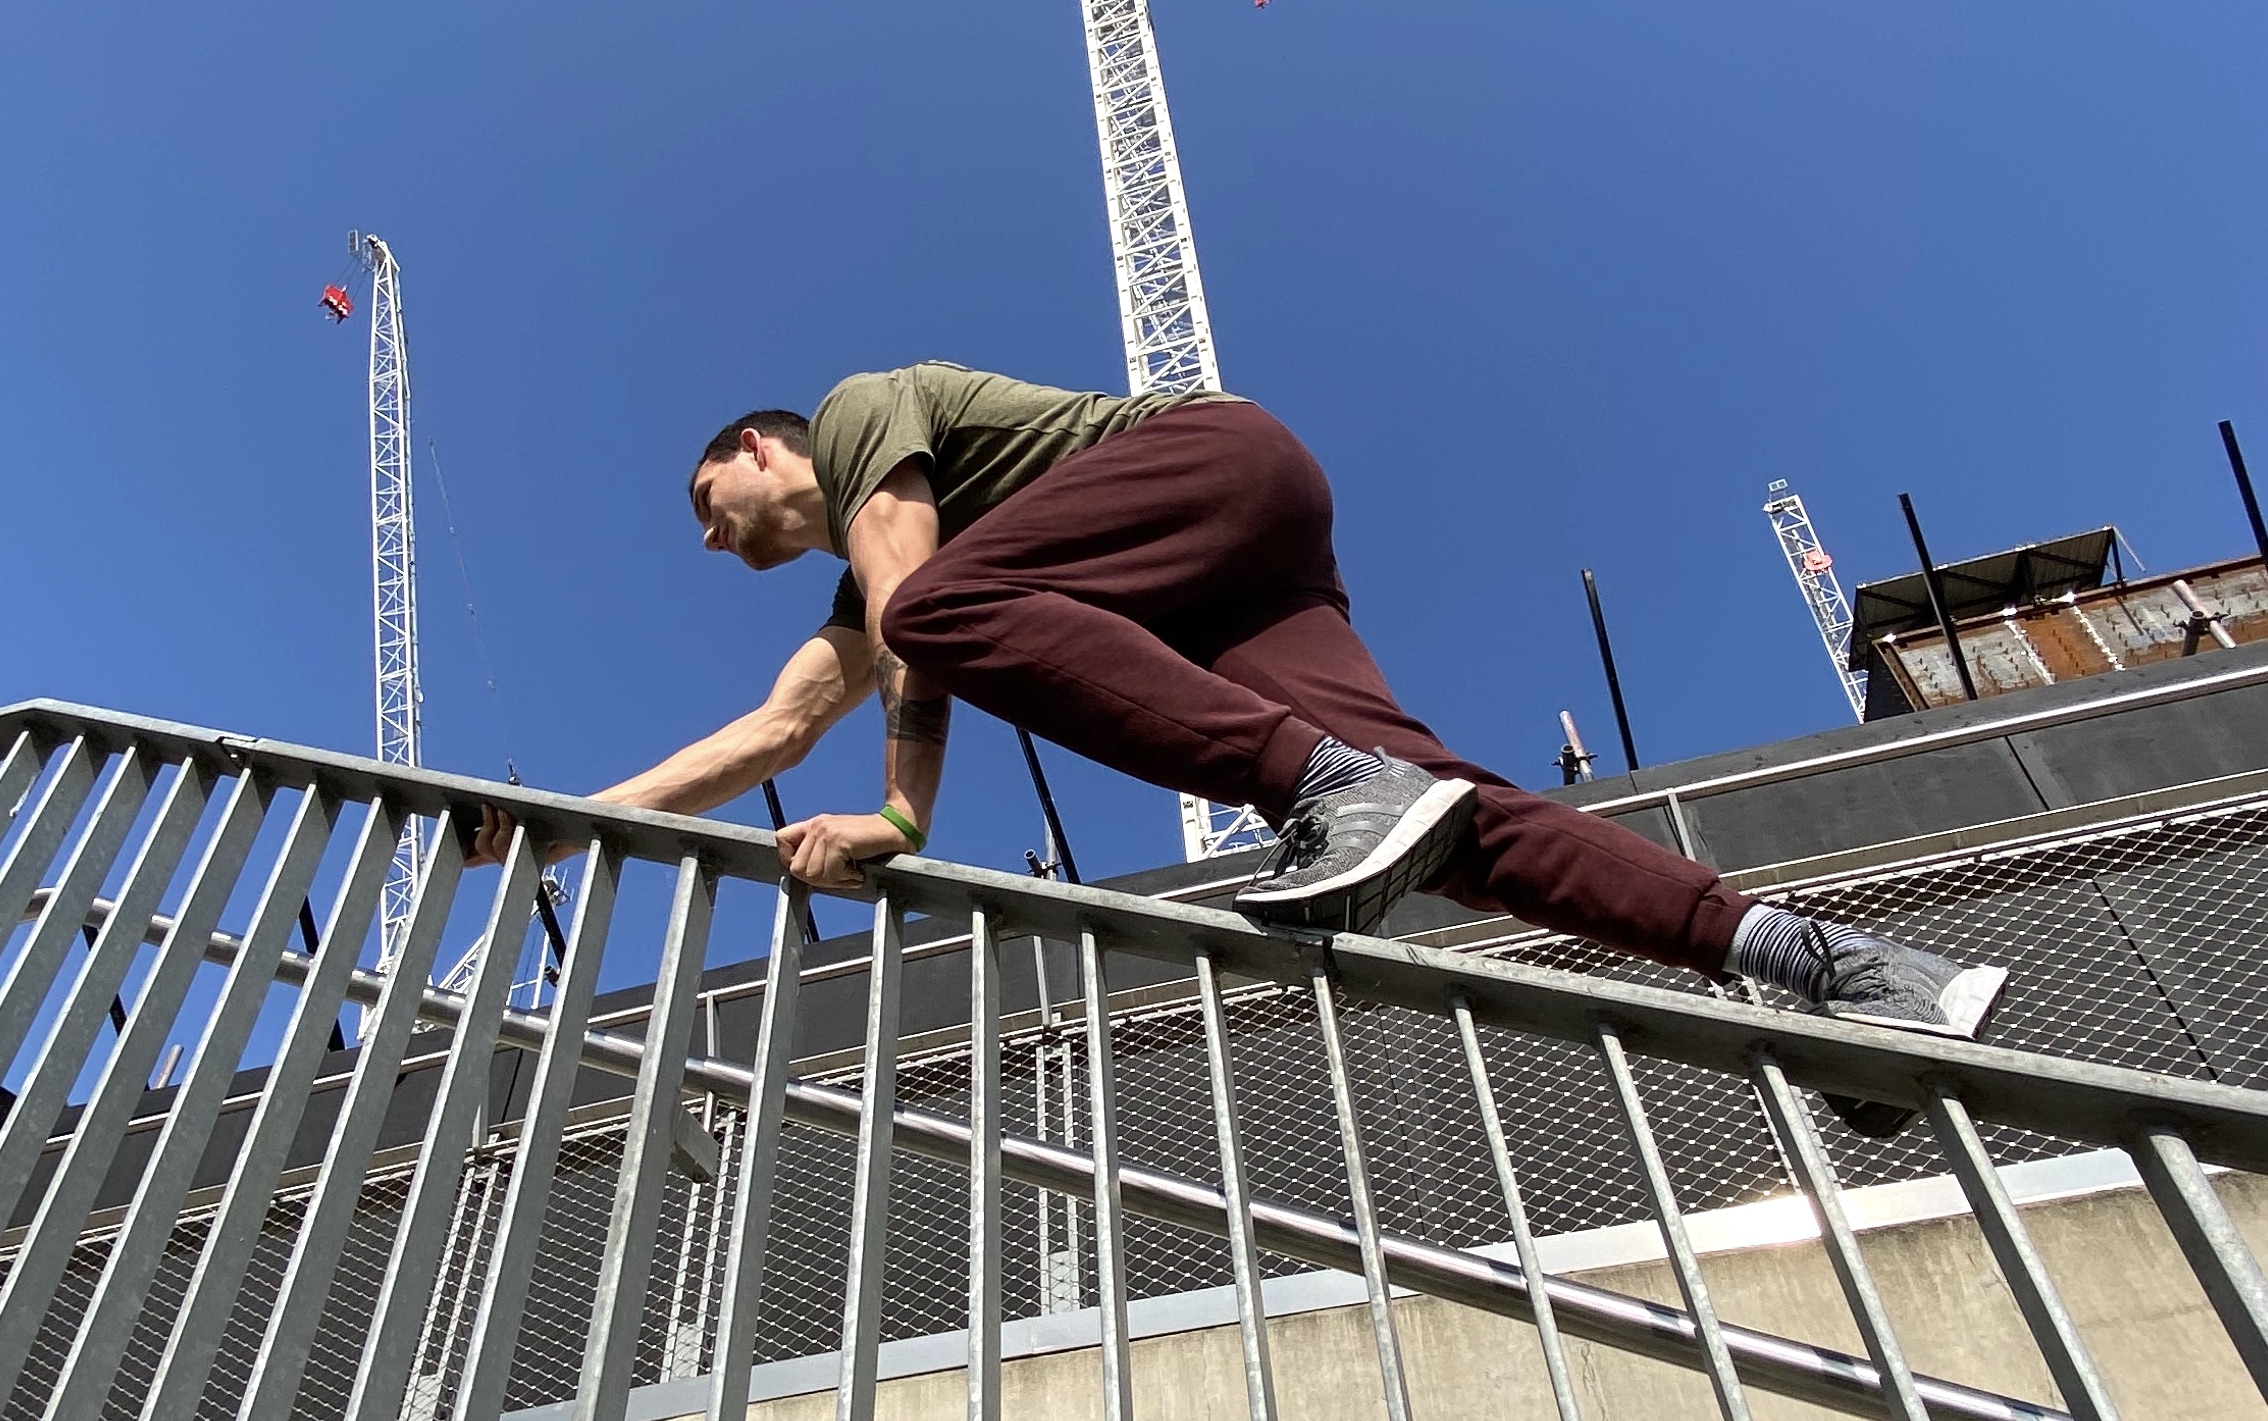 How to Get Started in Parkour or Free Running: 16 Best Tips